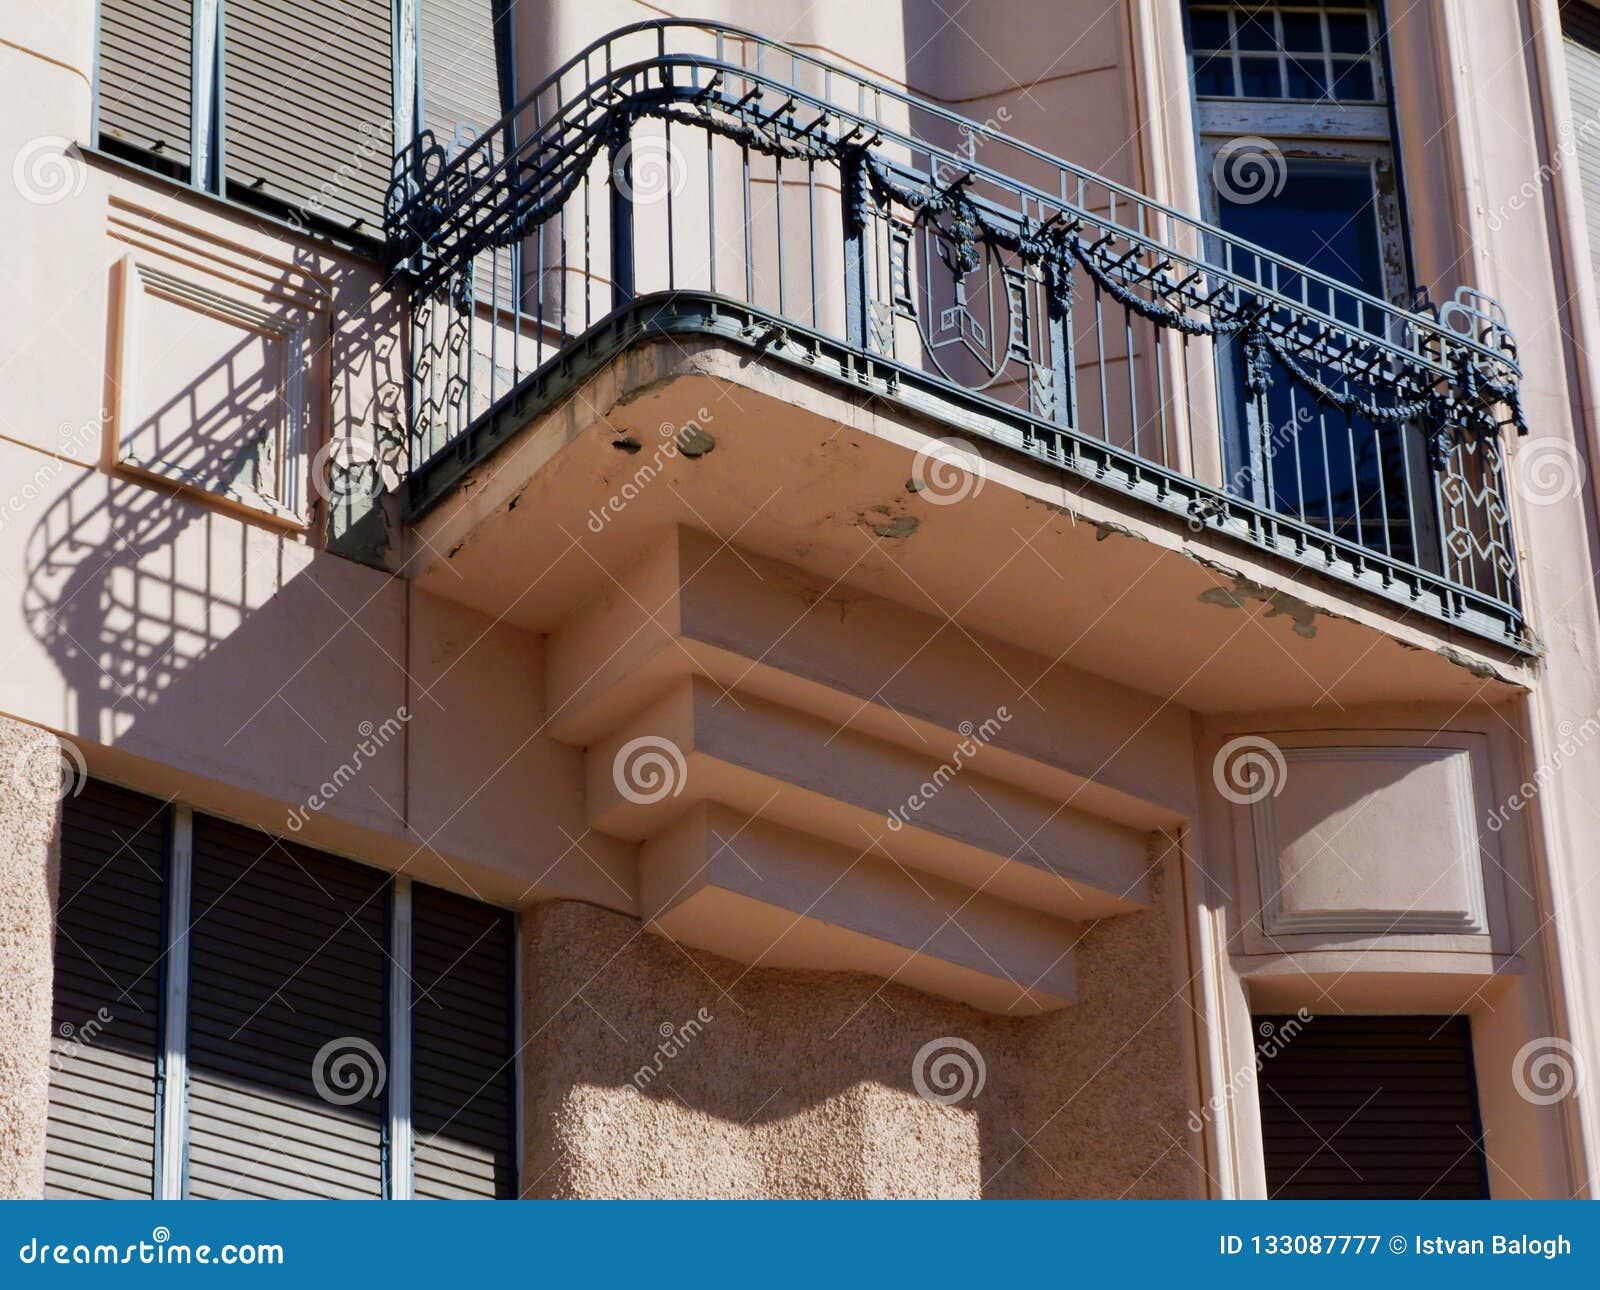 secessionist style facade detail with balcony and green window